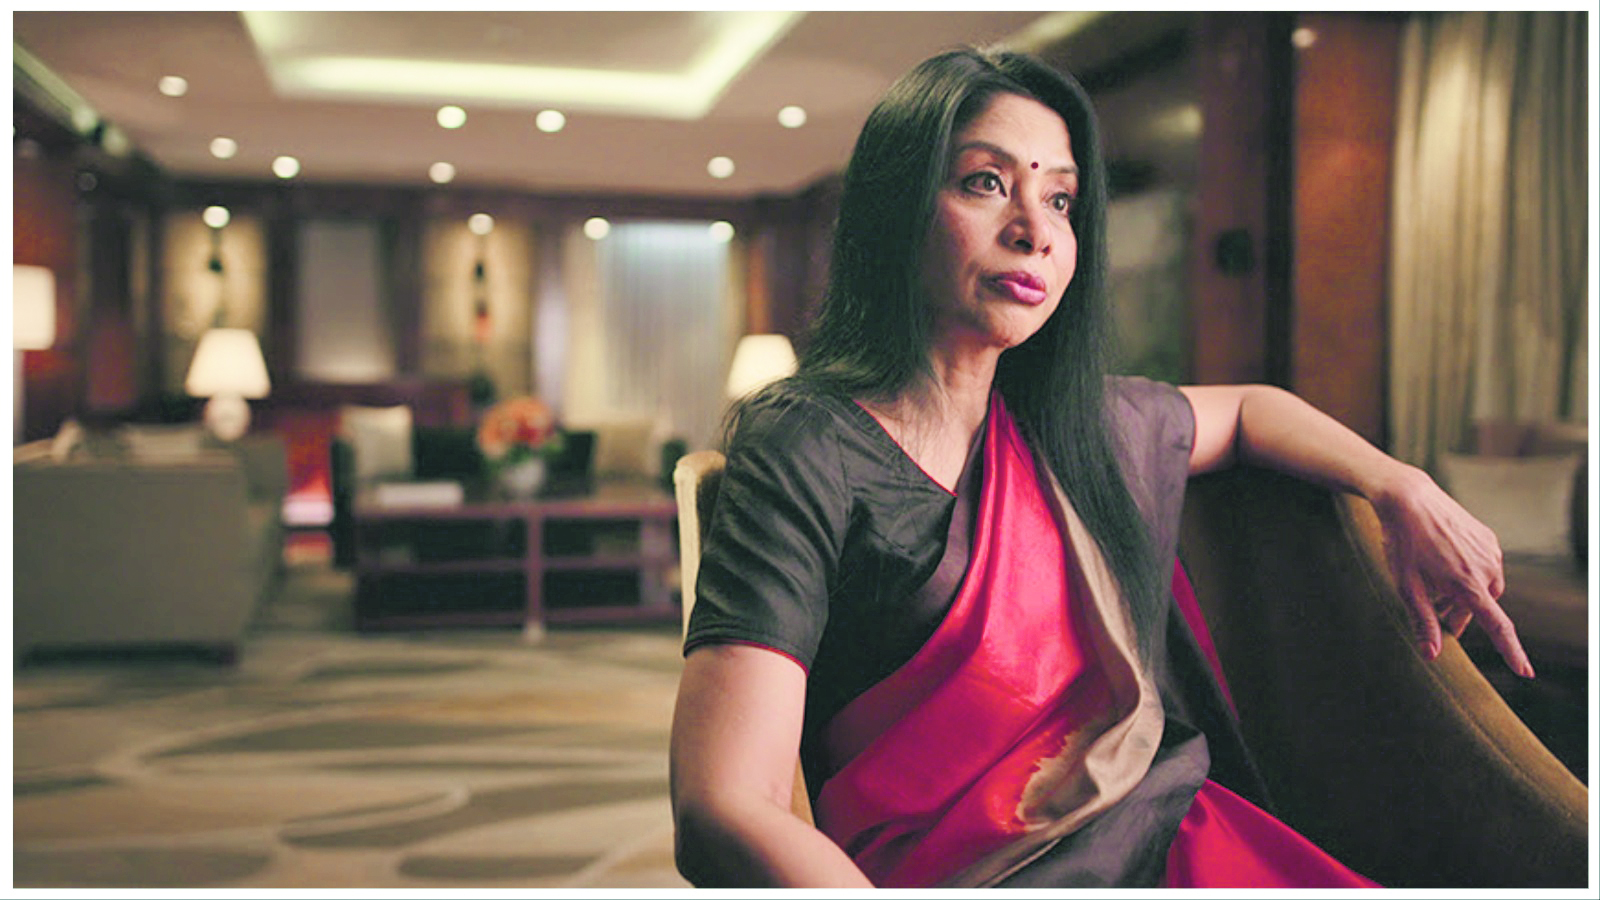 The Indrani Mukerjea Story raises more questions than provide answers